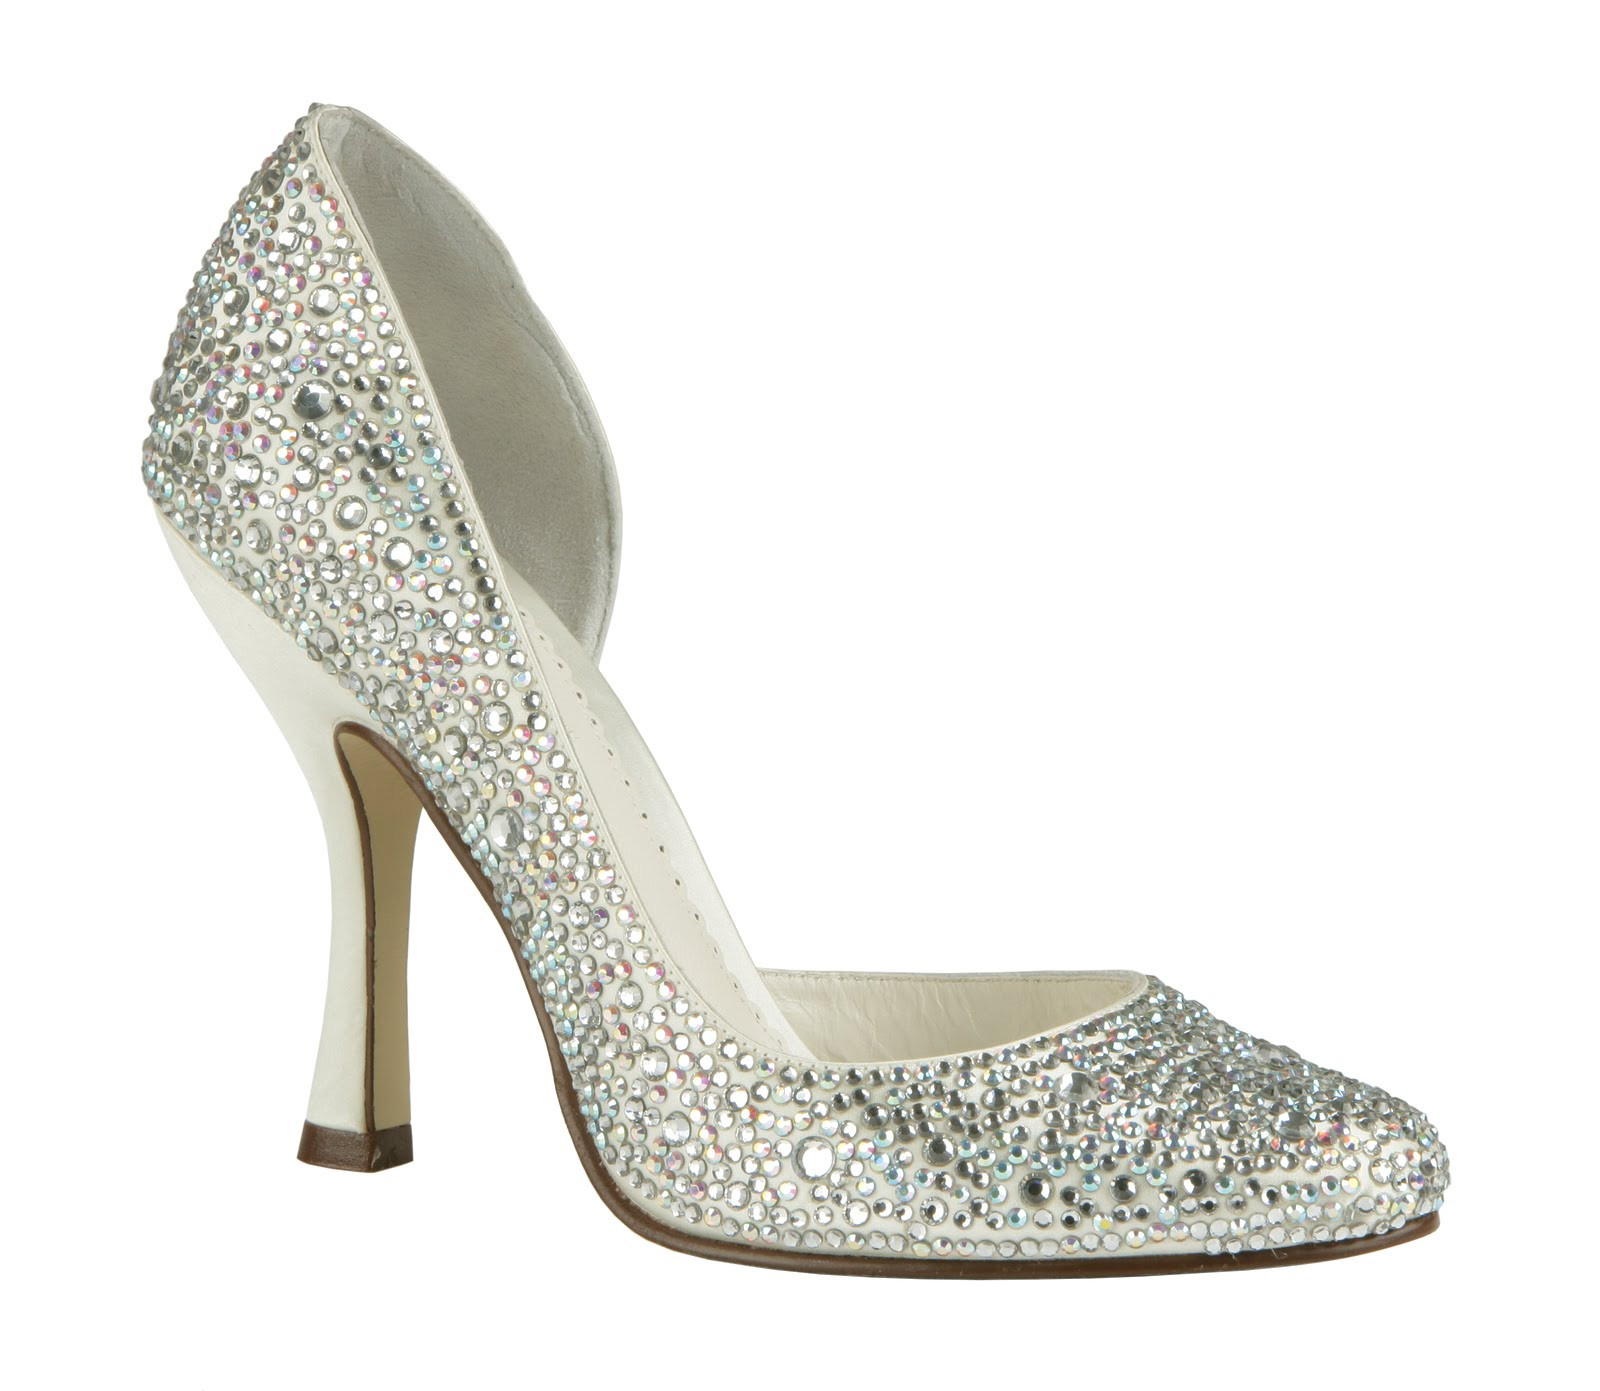 Sparkly Shoes For Wedding
 Everything But The Dress Sparkly Bridal Accessories All